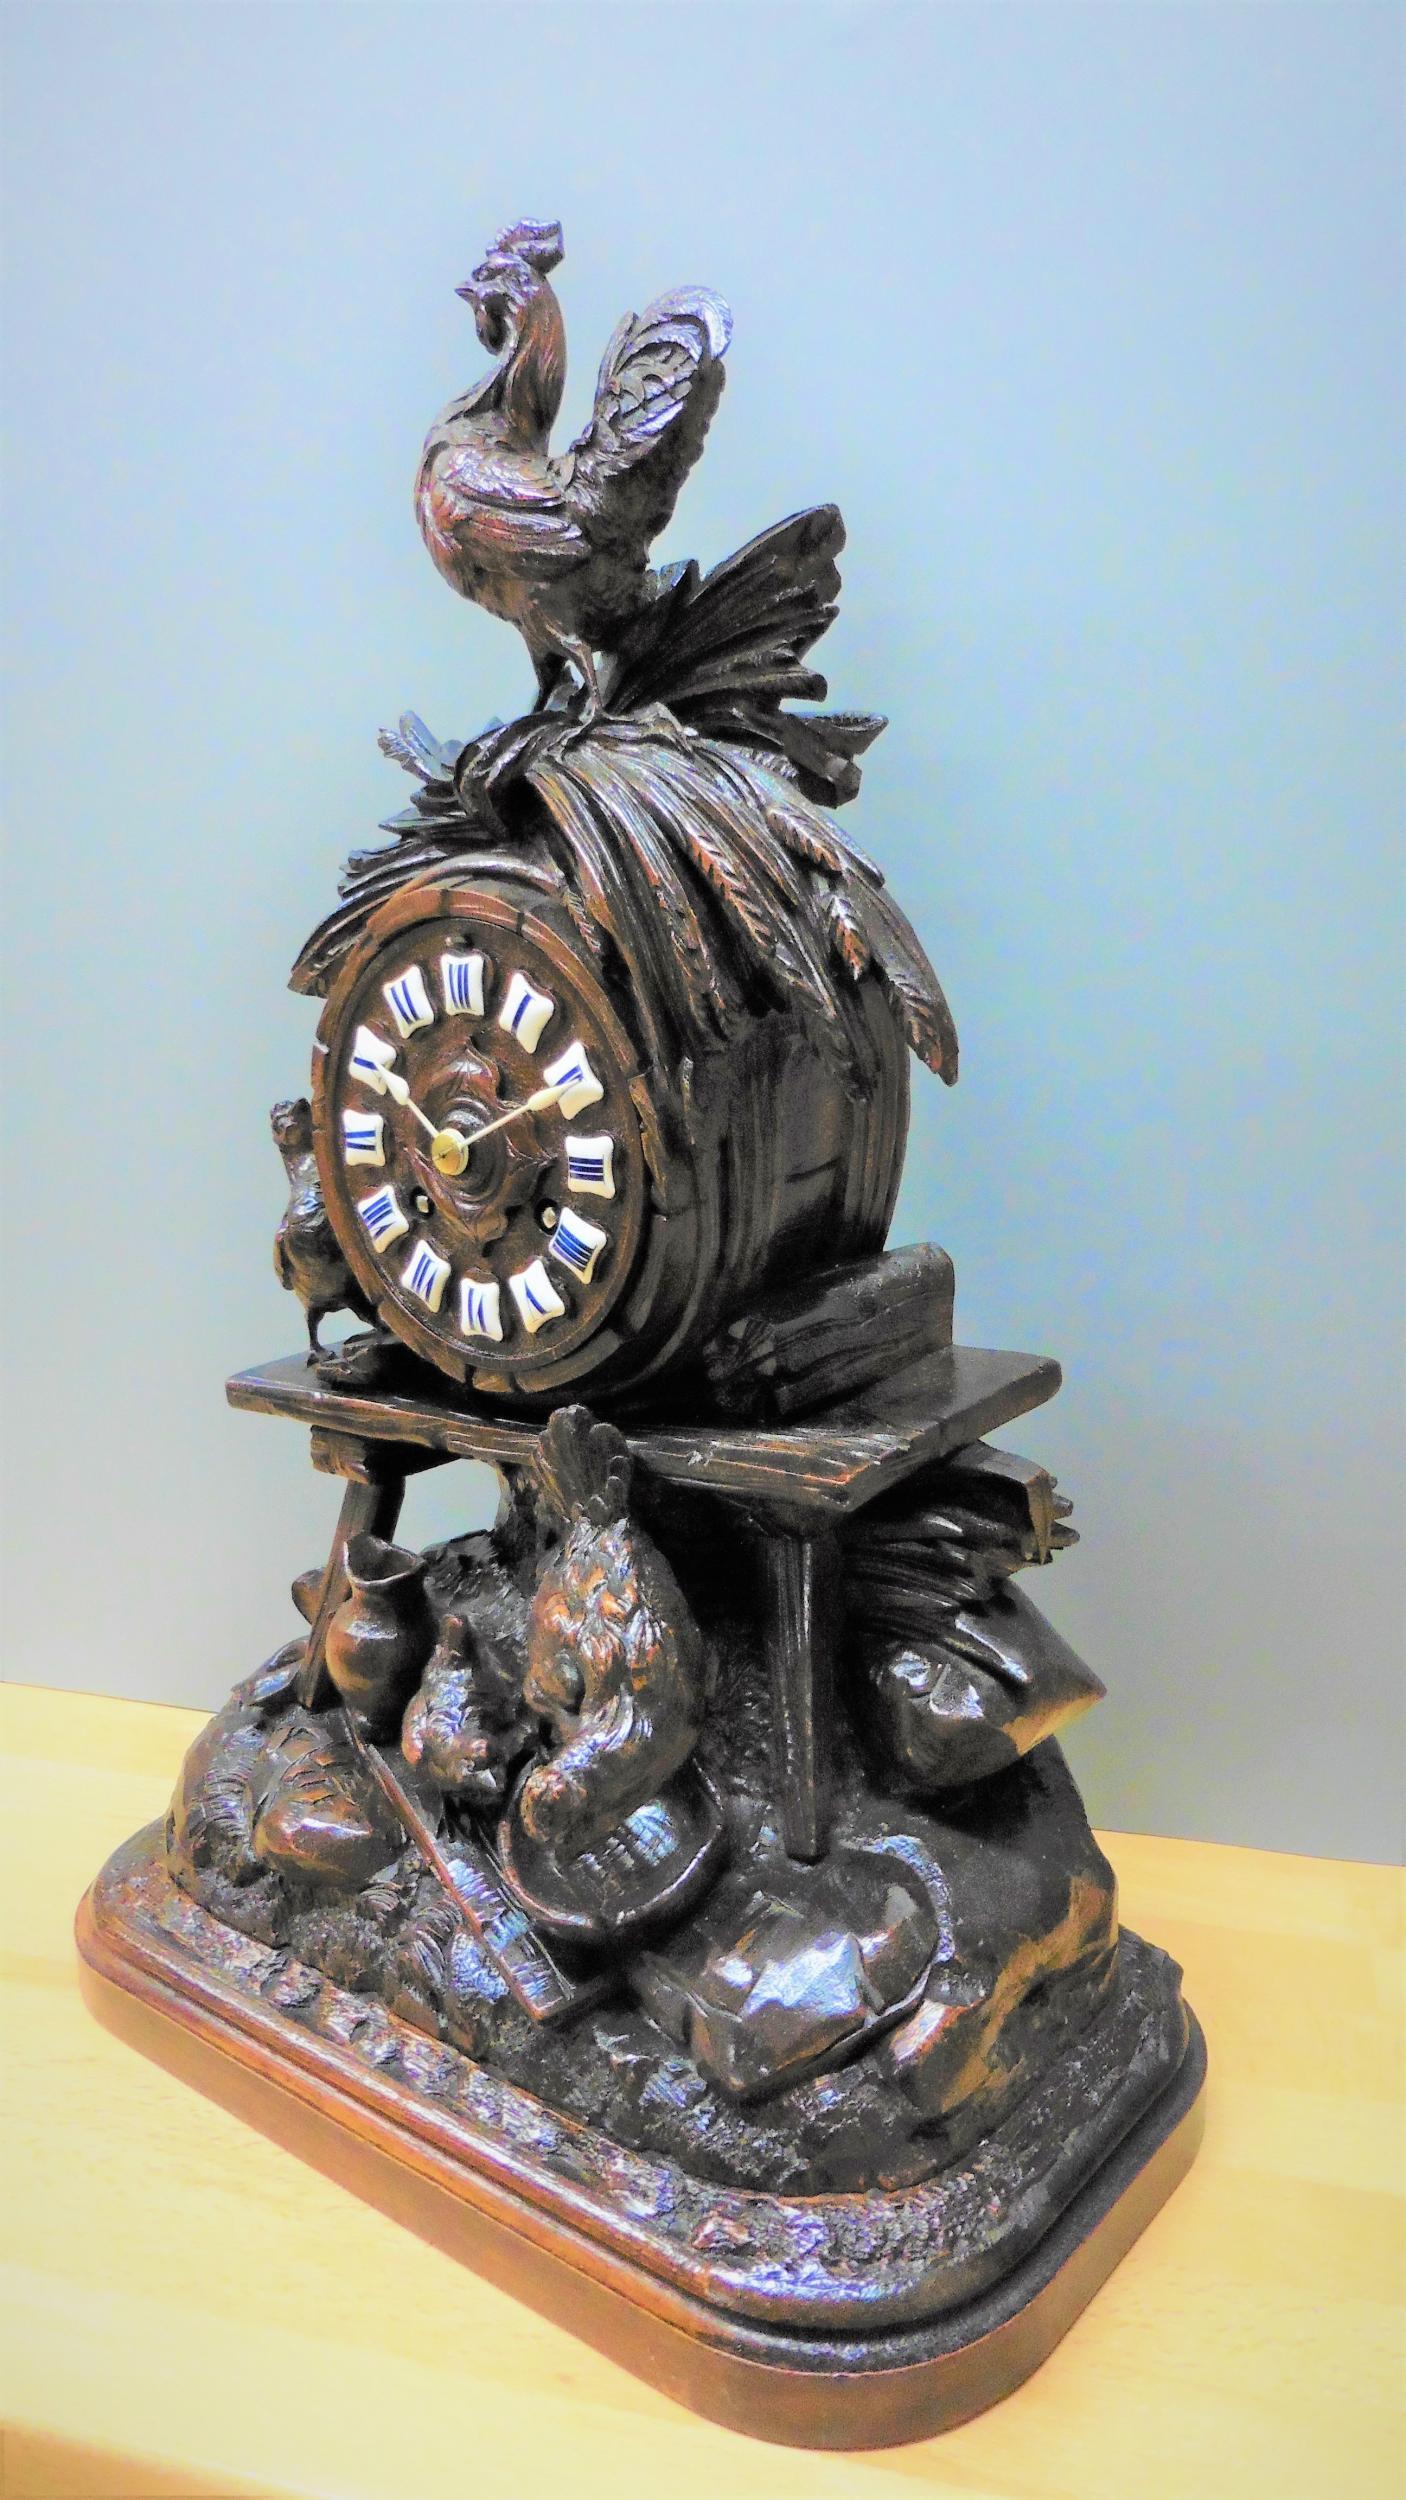 Black Forest carved mantel clock

Black Forest mantel clock beautifully hand carved with fine attention to detail depicting a farmyard scene with a hen and chick feeding and a cockerel resting on a wheat sheaf surmounting the clock which rests on